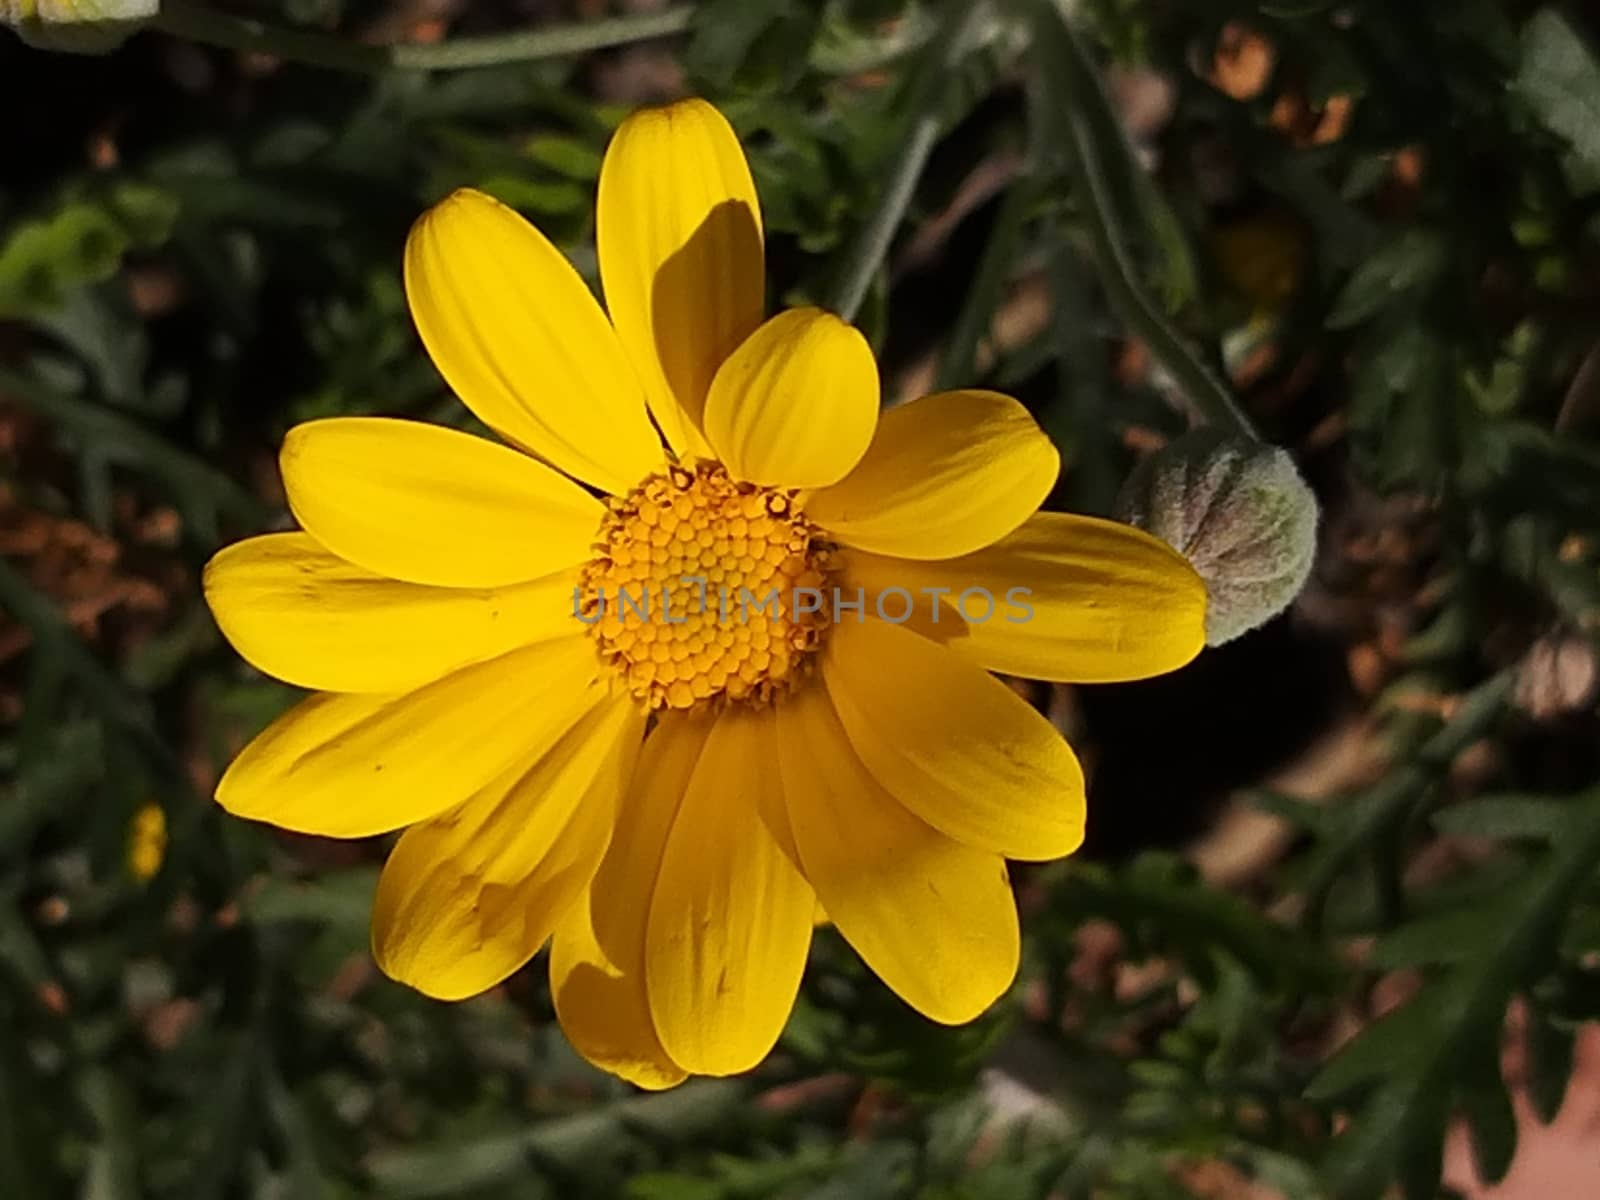 a common yellow daisy flower by carfedeph